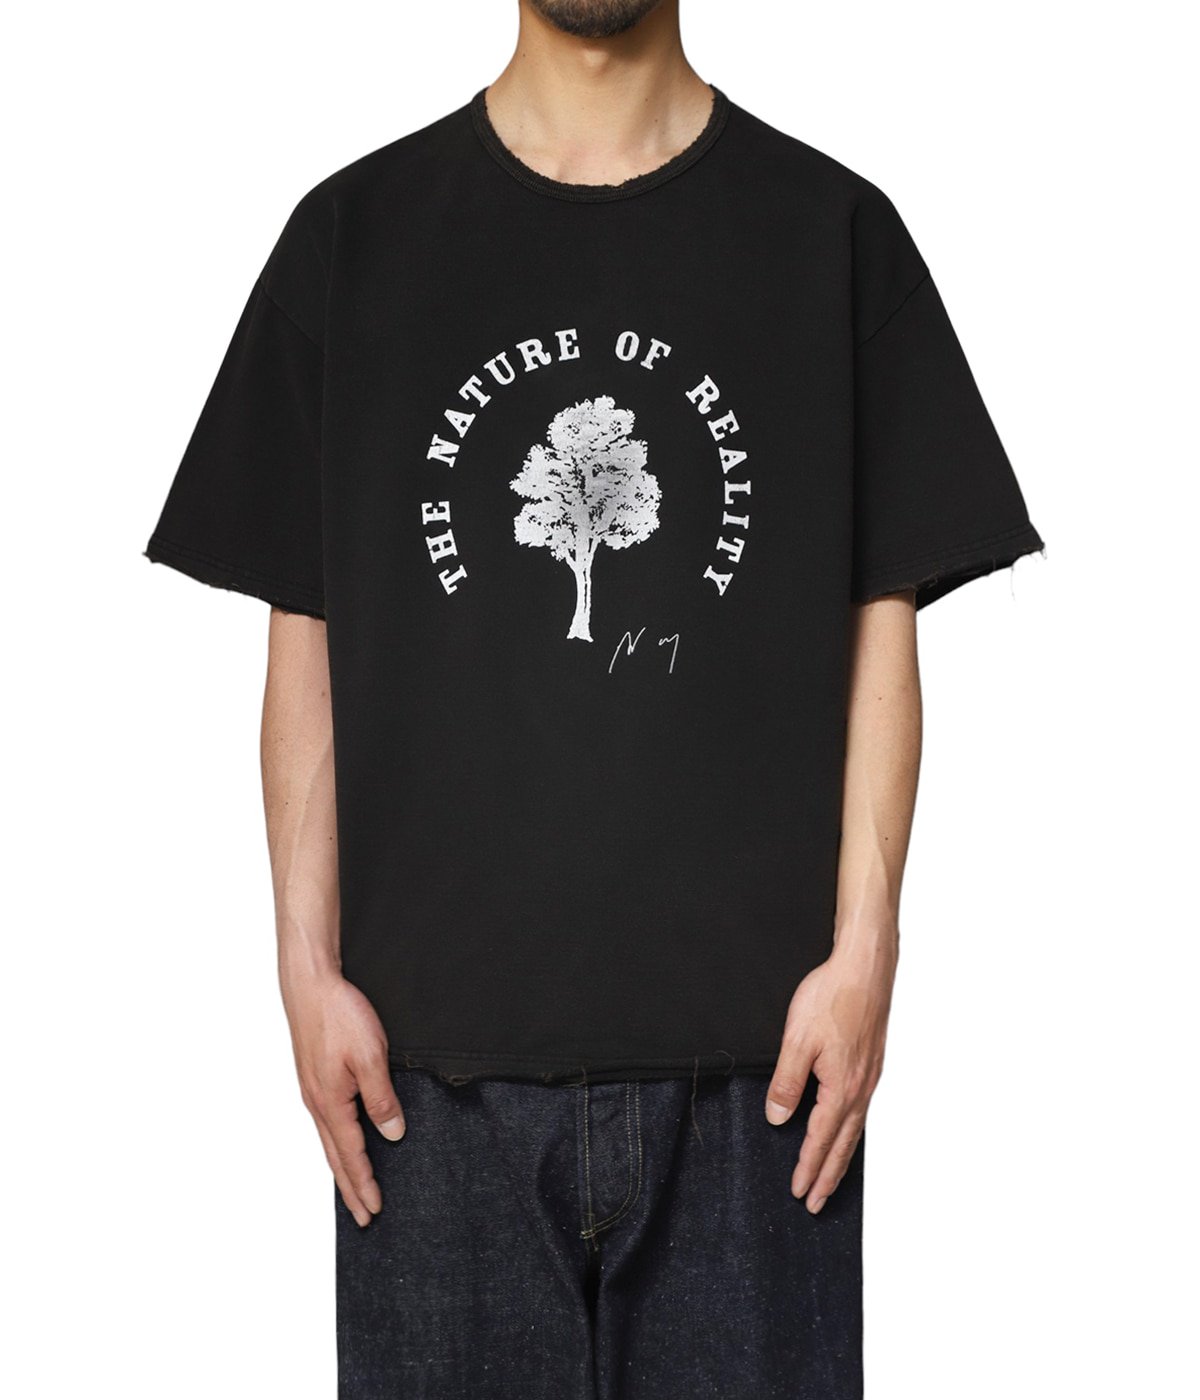 DAMAGE AGING T-SHIRT | ANCELLM(アンセルム) / トップス カットソー 